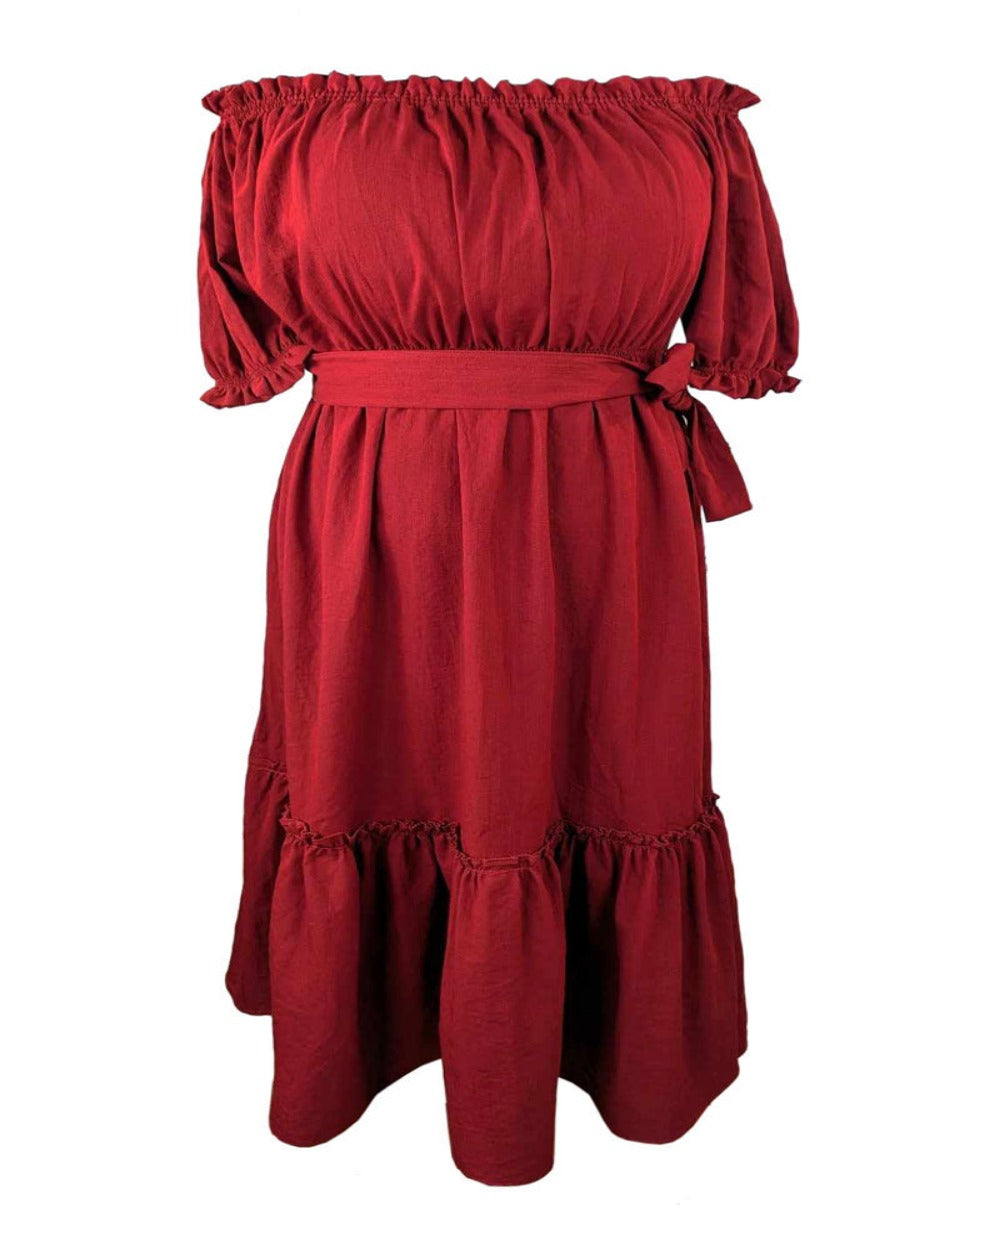 NEW Women's Maroon red off shoulder dress for spring-summer, with pockets, Perth, Au